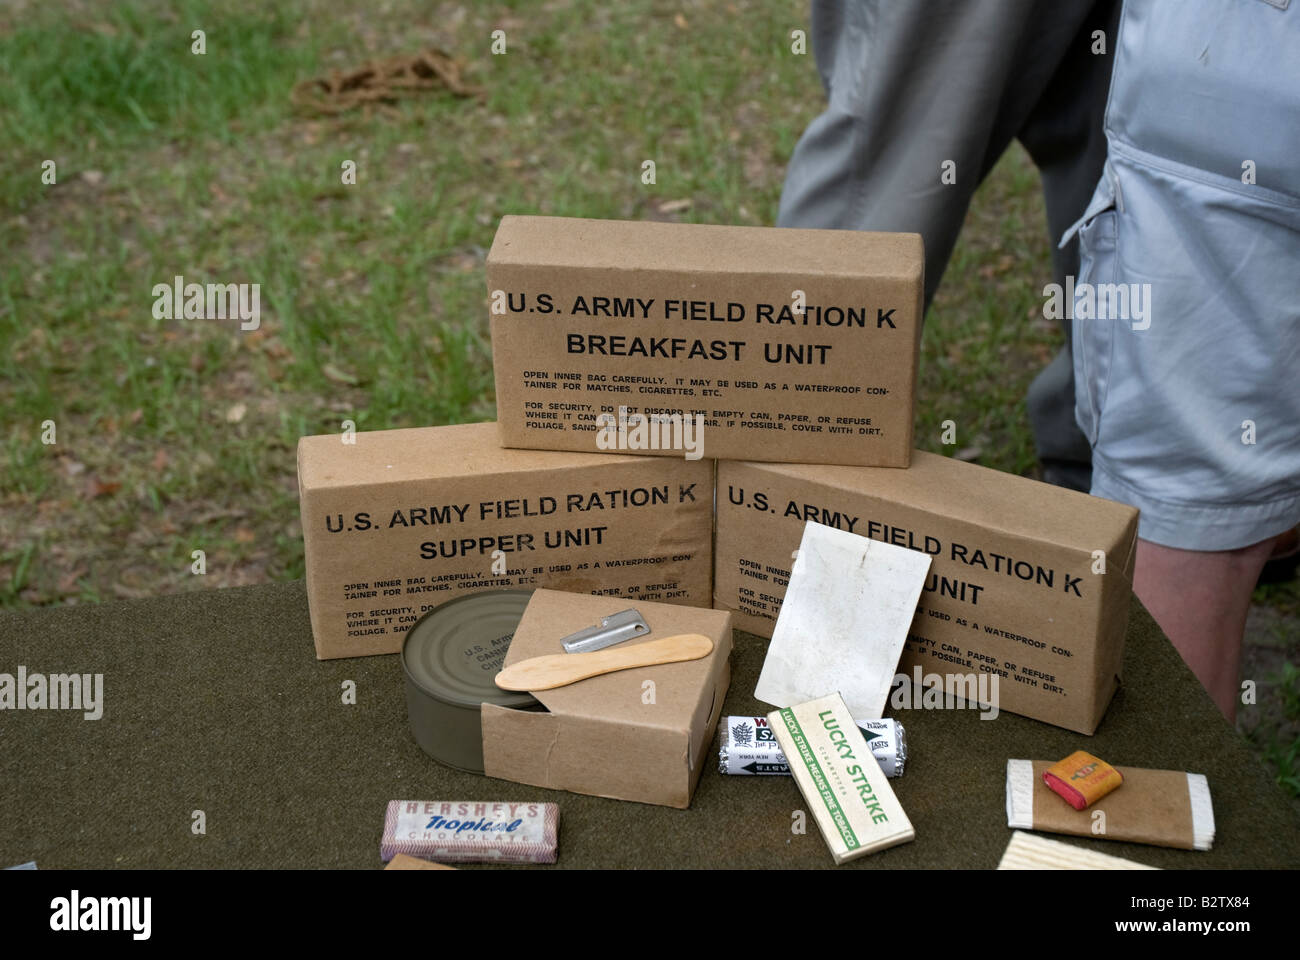 display of vintage U S Army equipment at fair Gainesville Florida U S Army World War 2 K Ration food items Stock Photo